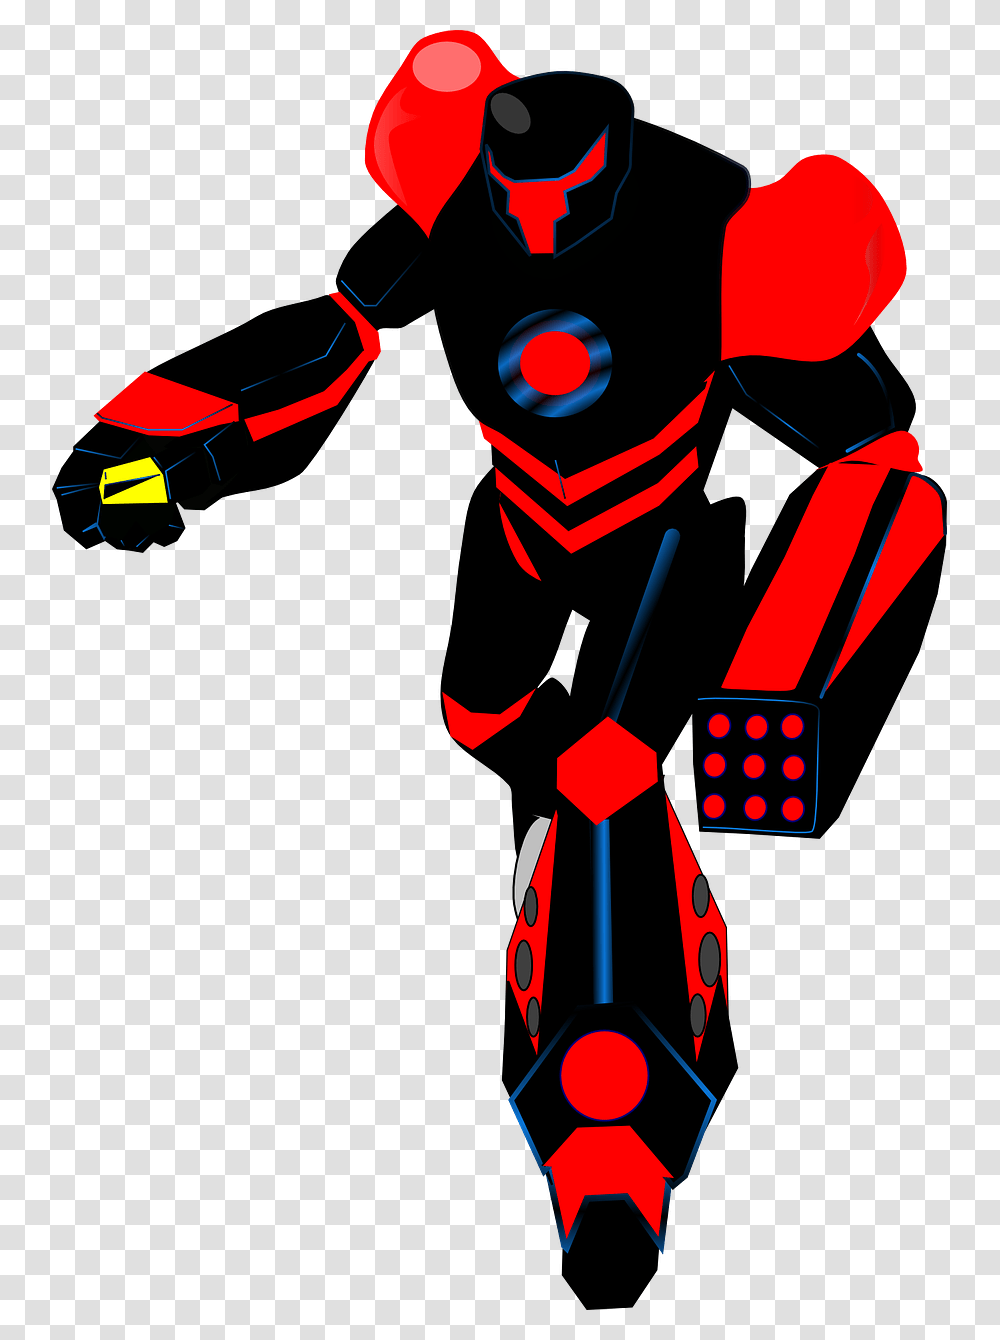 Robot Red Black Transformer Android Robotics Black And Red Robot, Weapon, Weaponry, Bomb, Dynamite Transparent Png